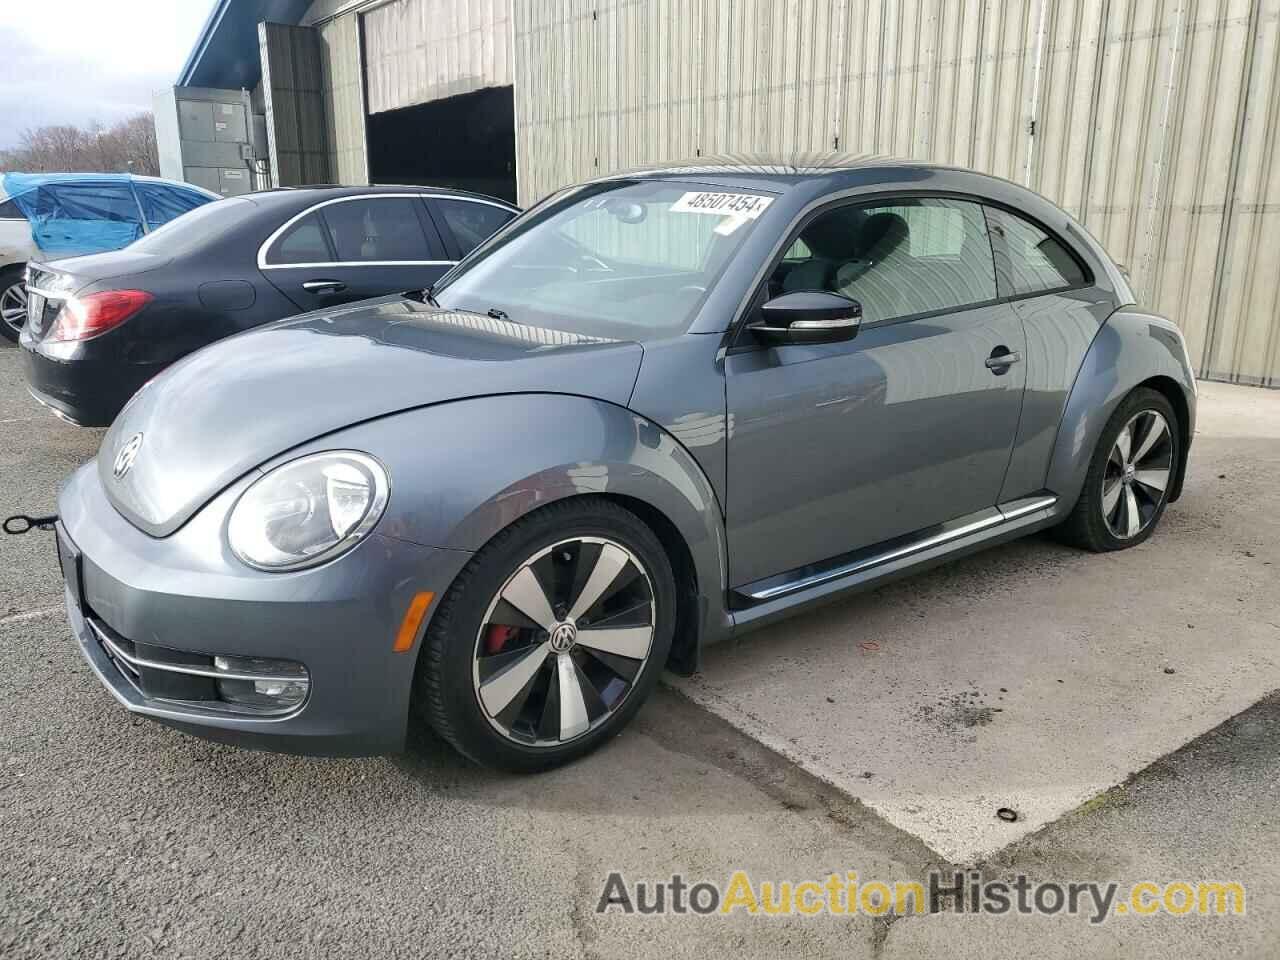 VOLKSWAGEN BEETLE TURBO, 3VW4A7AT1CM631421